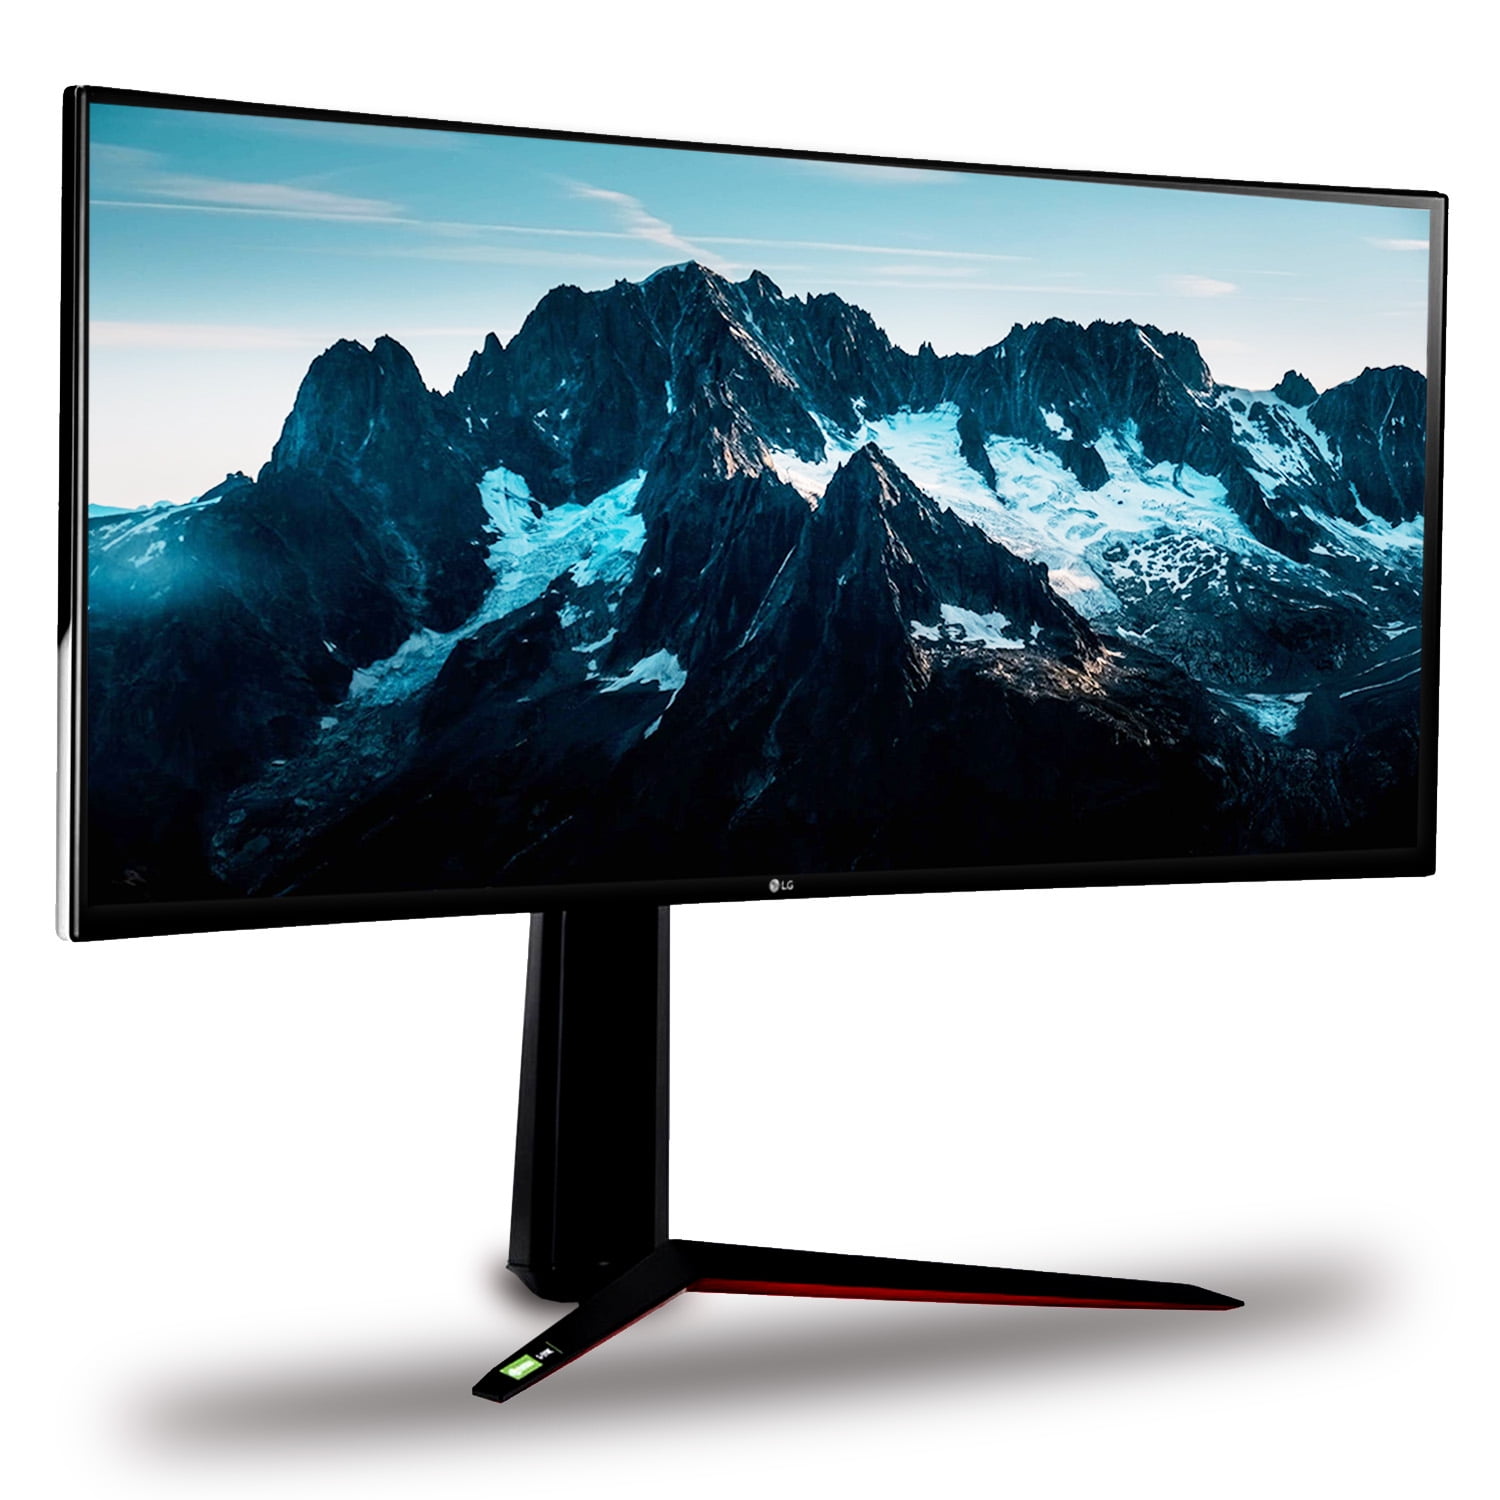 LG 34GN850-B 34 Inch 21: 9 UltraGear Curved QHD (3440 x 1440) 1ms Nano IPS  Gaming Monitor with 144Hz and G-SYNC Compatibility - Black (34GN850-B)